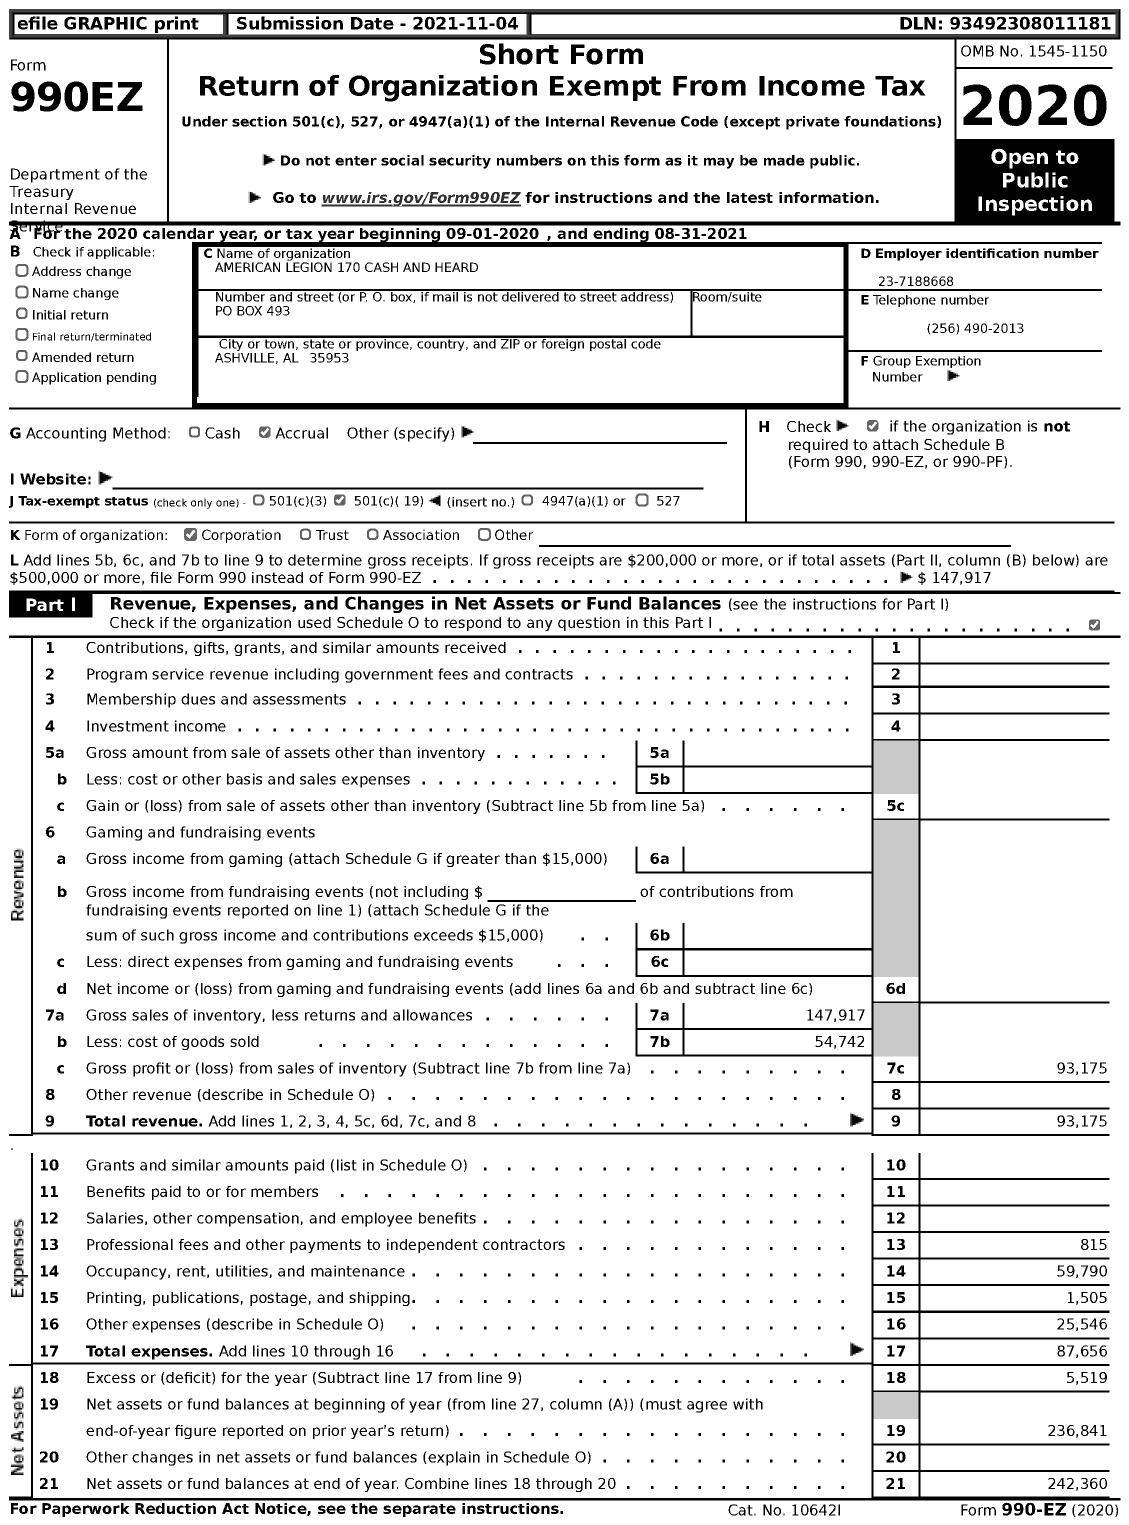 Image of first page of 2020 Form 990EZ for AMERICAN LEGION 170 CASH and HEARD